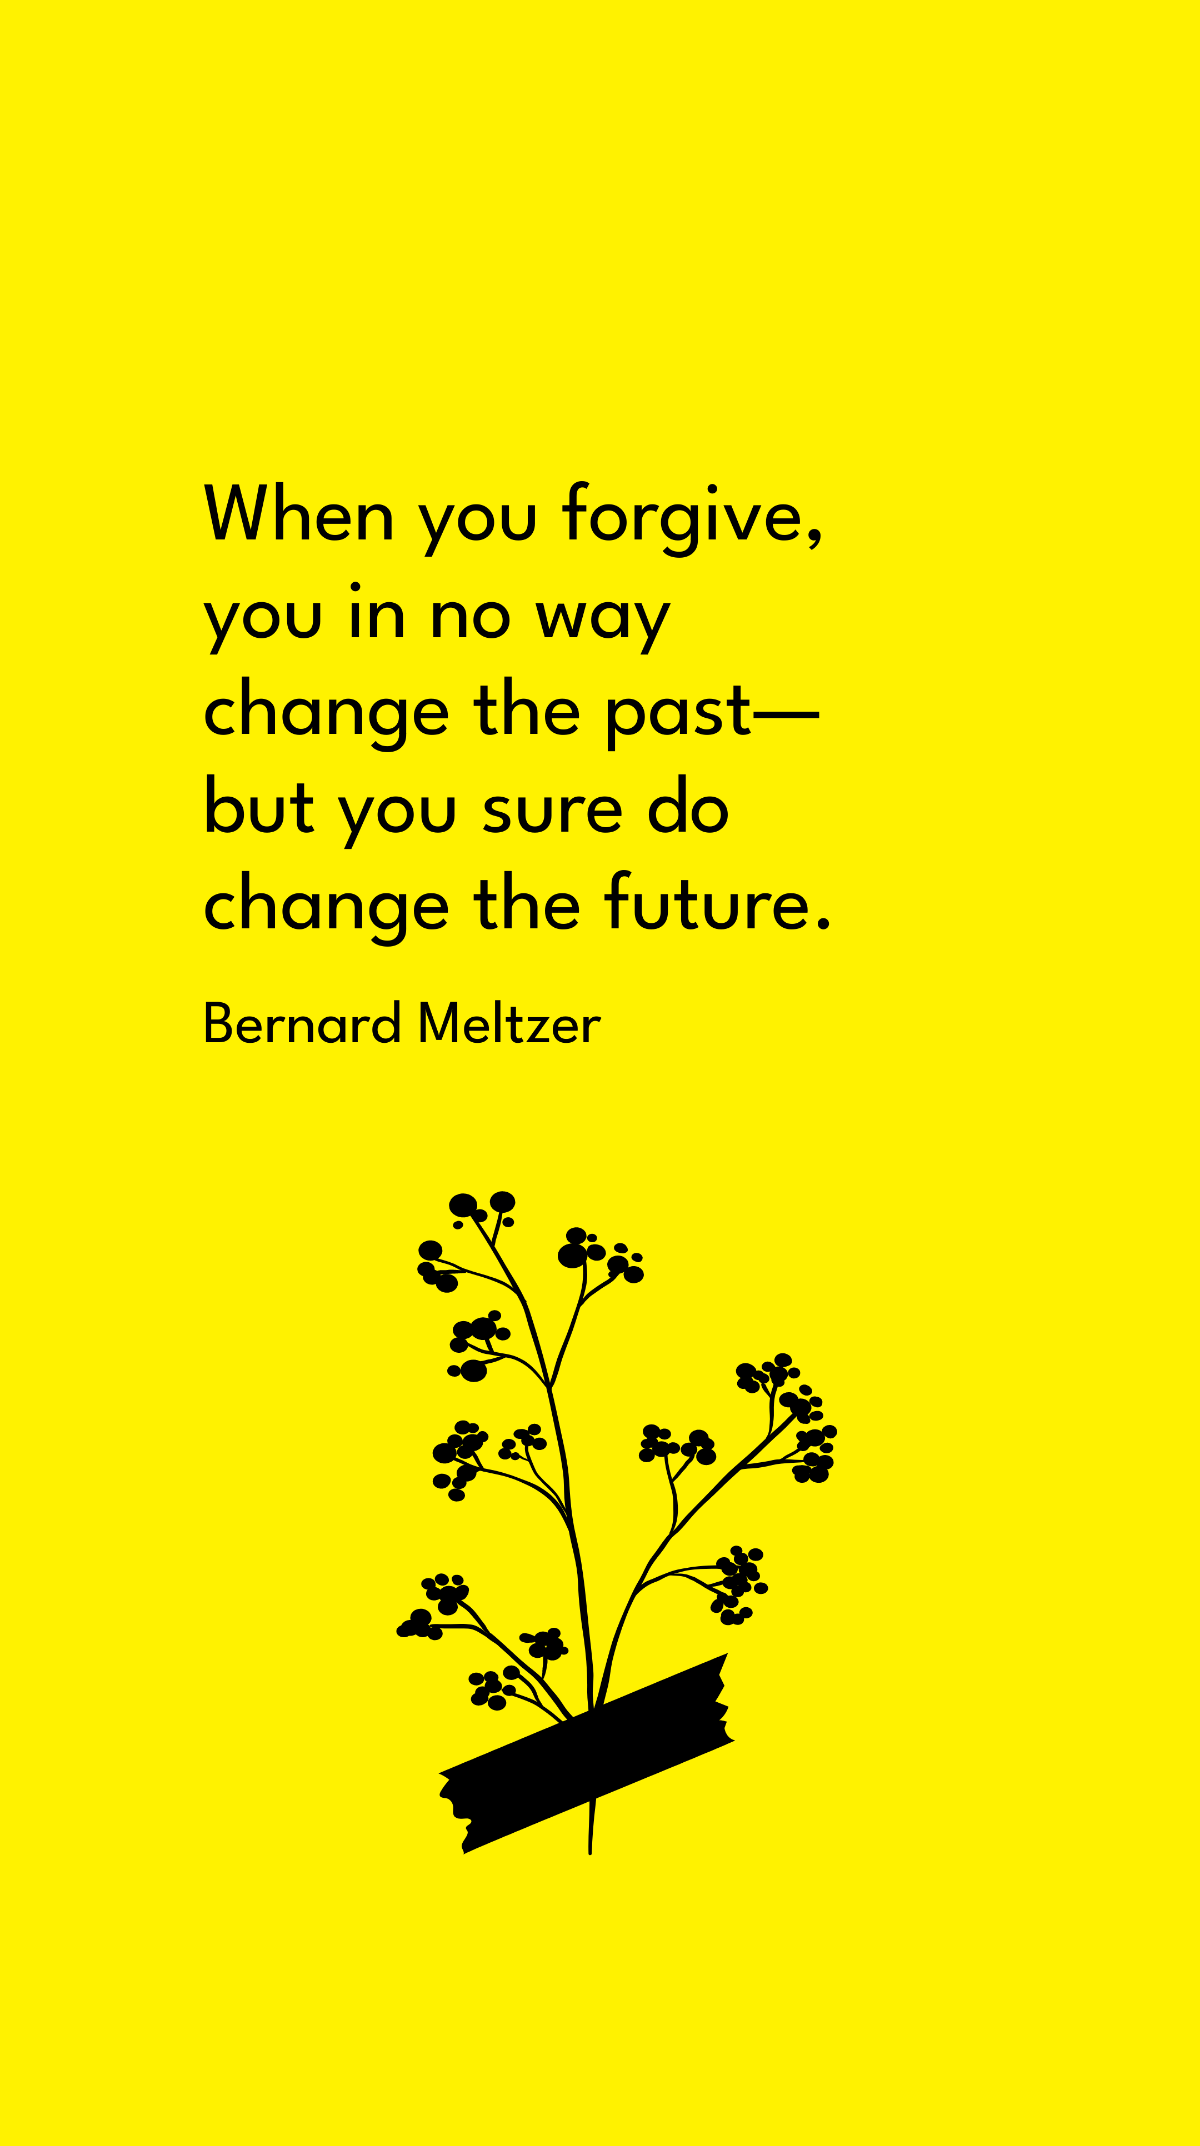 Bernard Meltzer - When you forgive, you in no way change the past - but you sure do change the future. Template